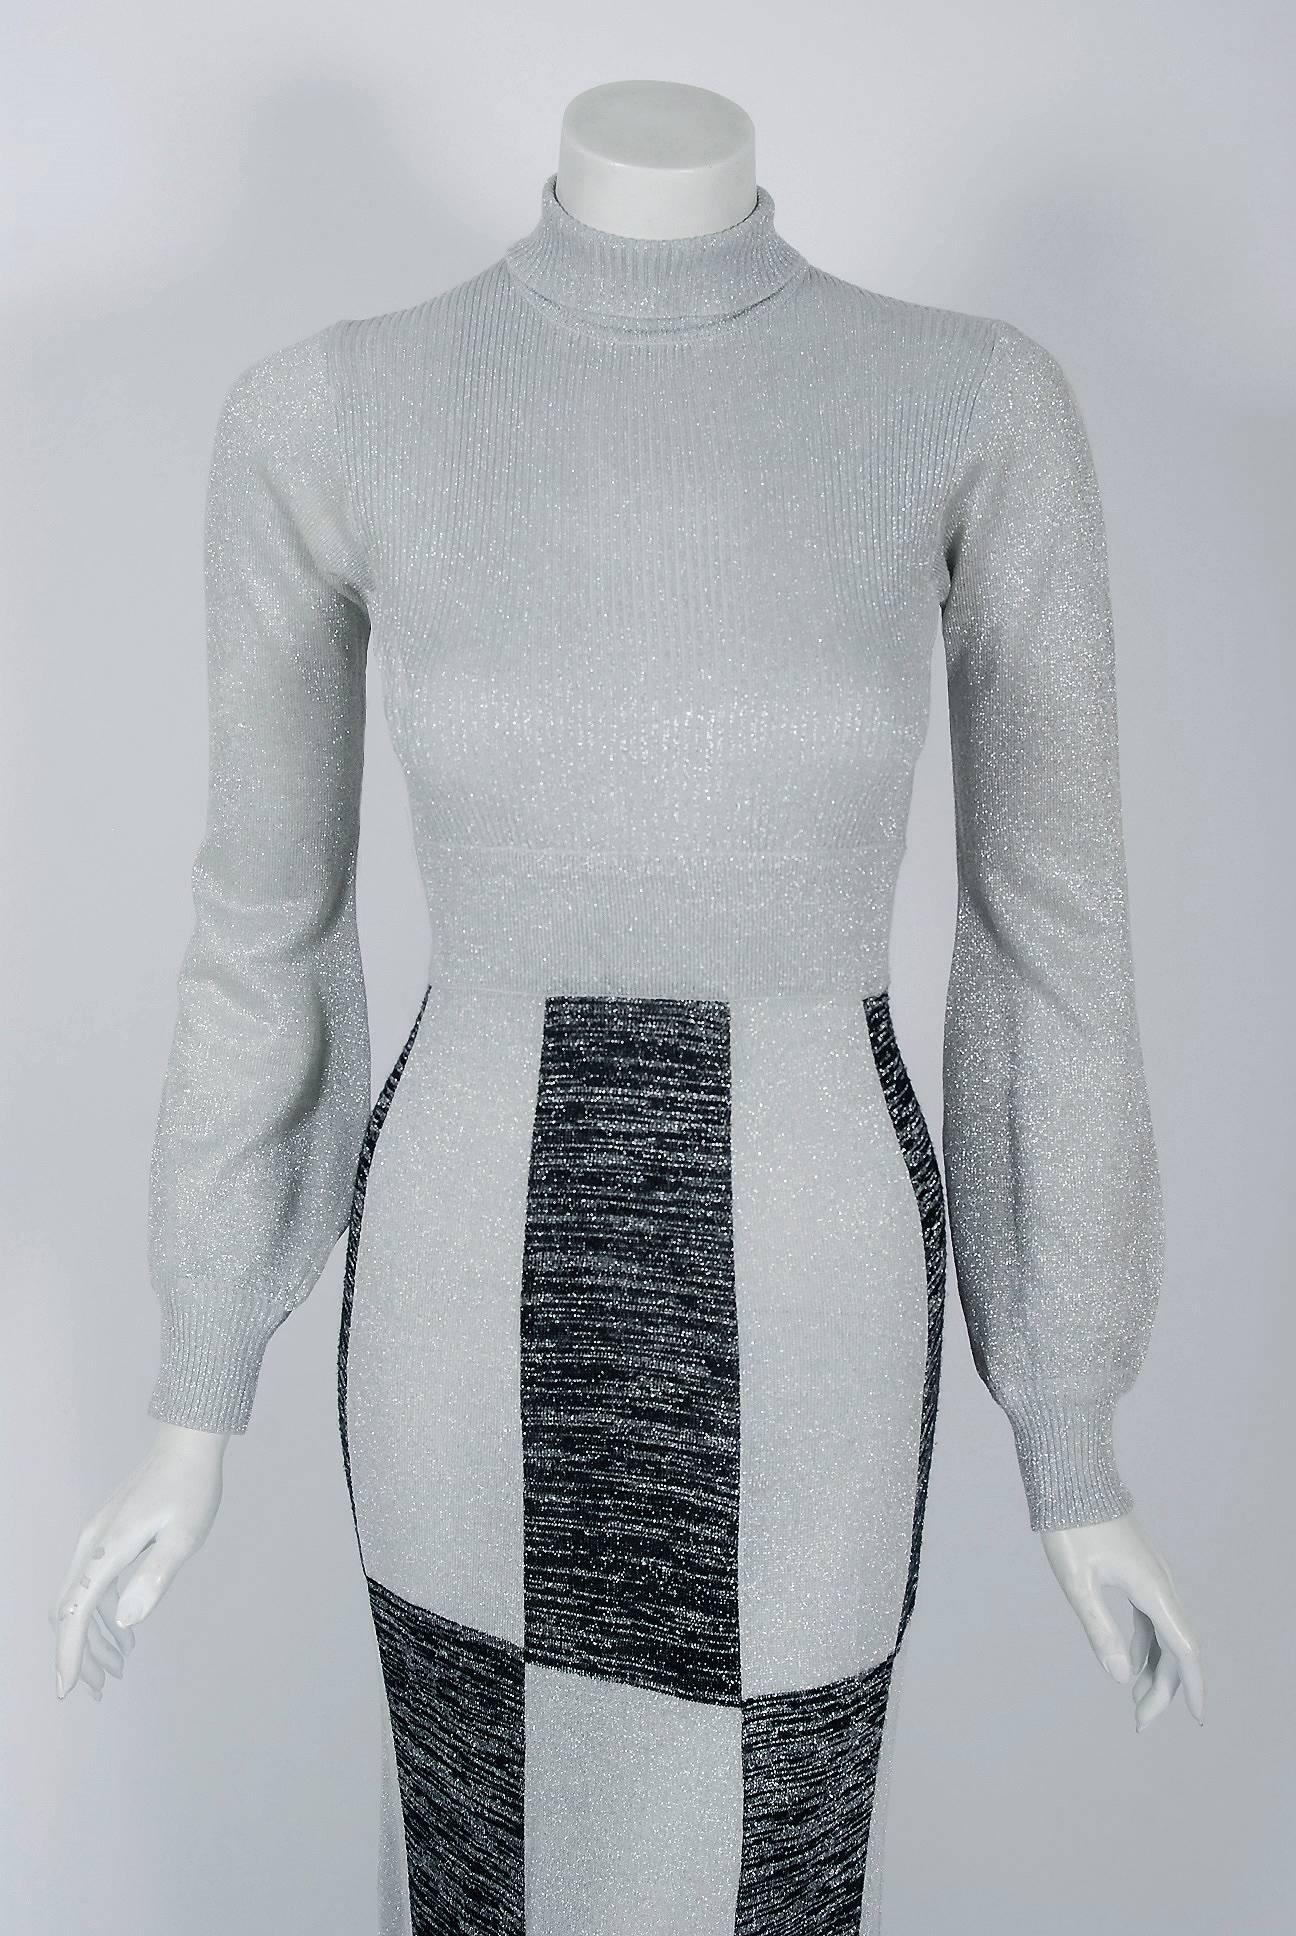 Redefining an entire genre of fashion, the 1970's were seen as Missoni's launch to fame as the boho chic trends coincided with Missoni's trippy and psychedelic patterns. The silver and black op-art graphic knit on this beauty is delightfully soft